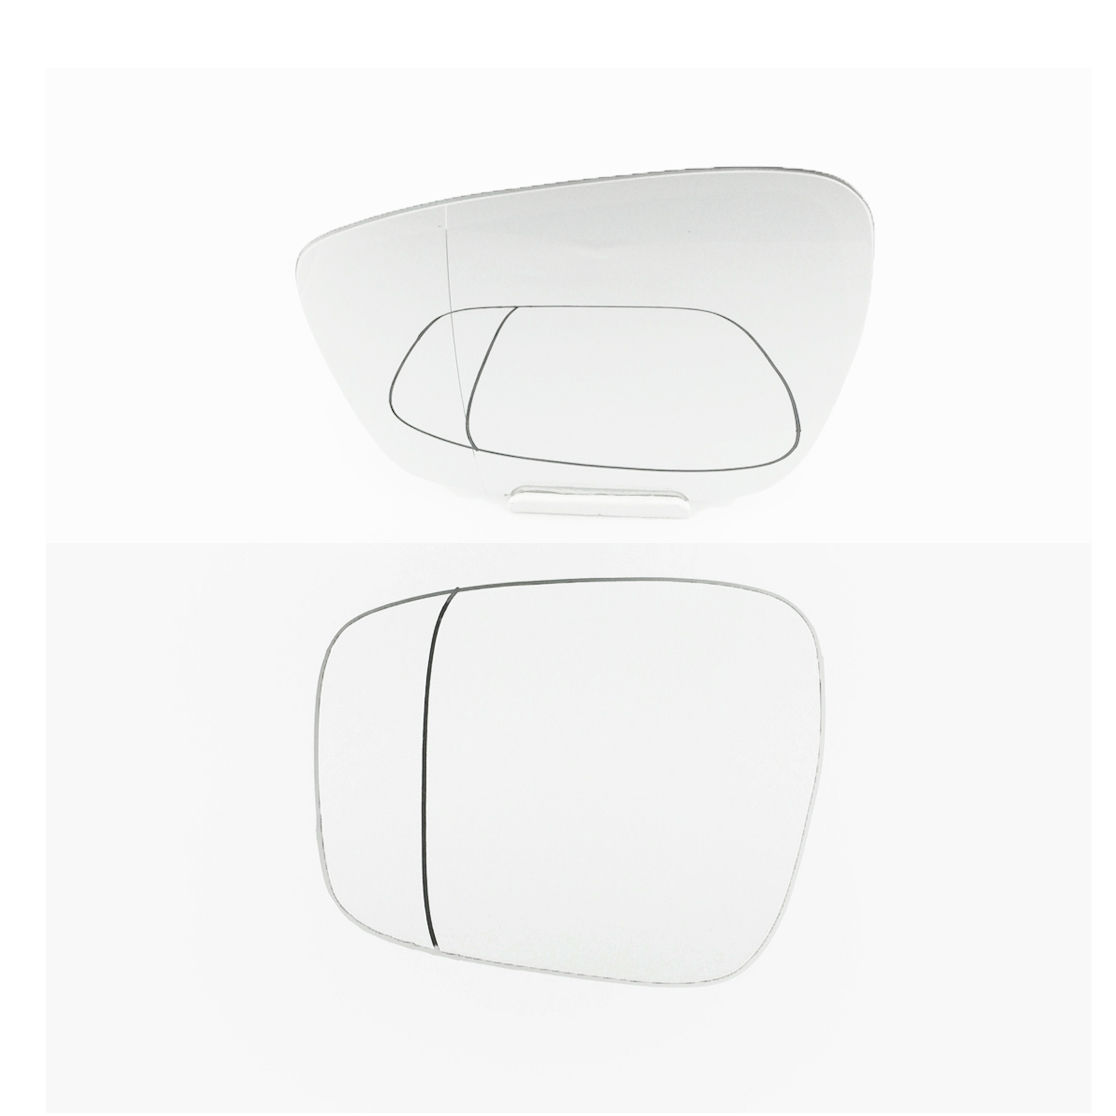 Peugeot 2008 Wing Mirror Glass RIGHT HAND ( UK Driver Side ) 2019 Onward – Convex Wing Mirror